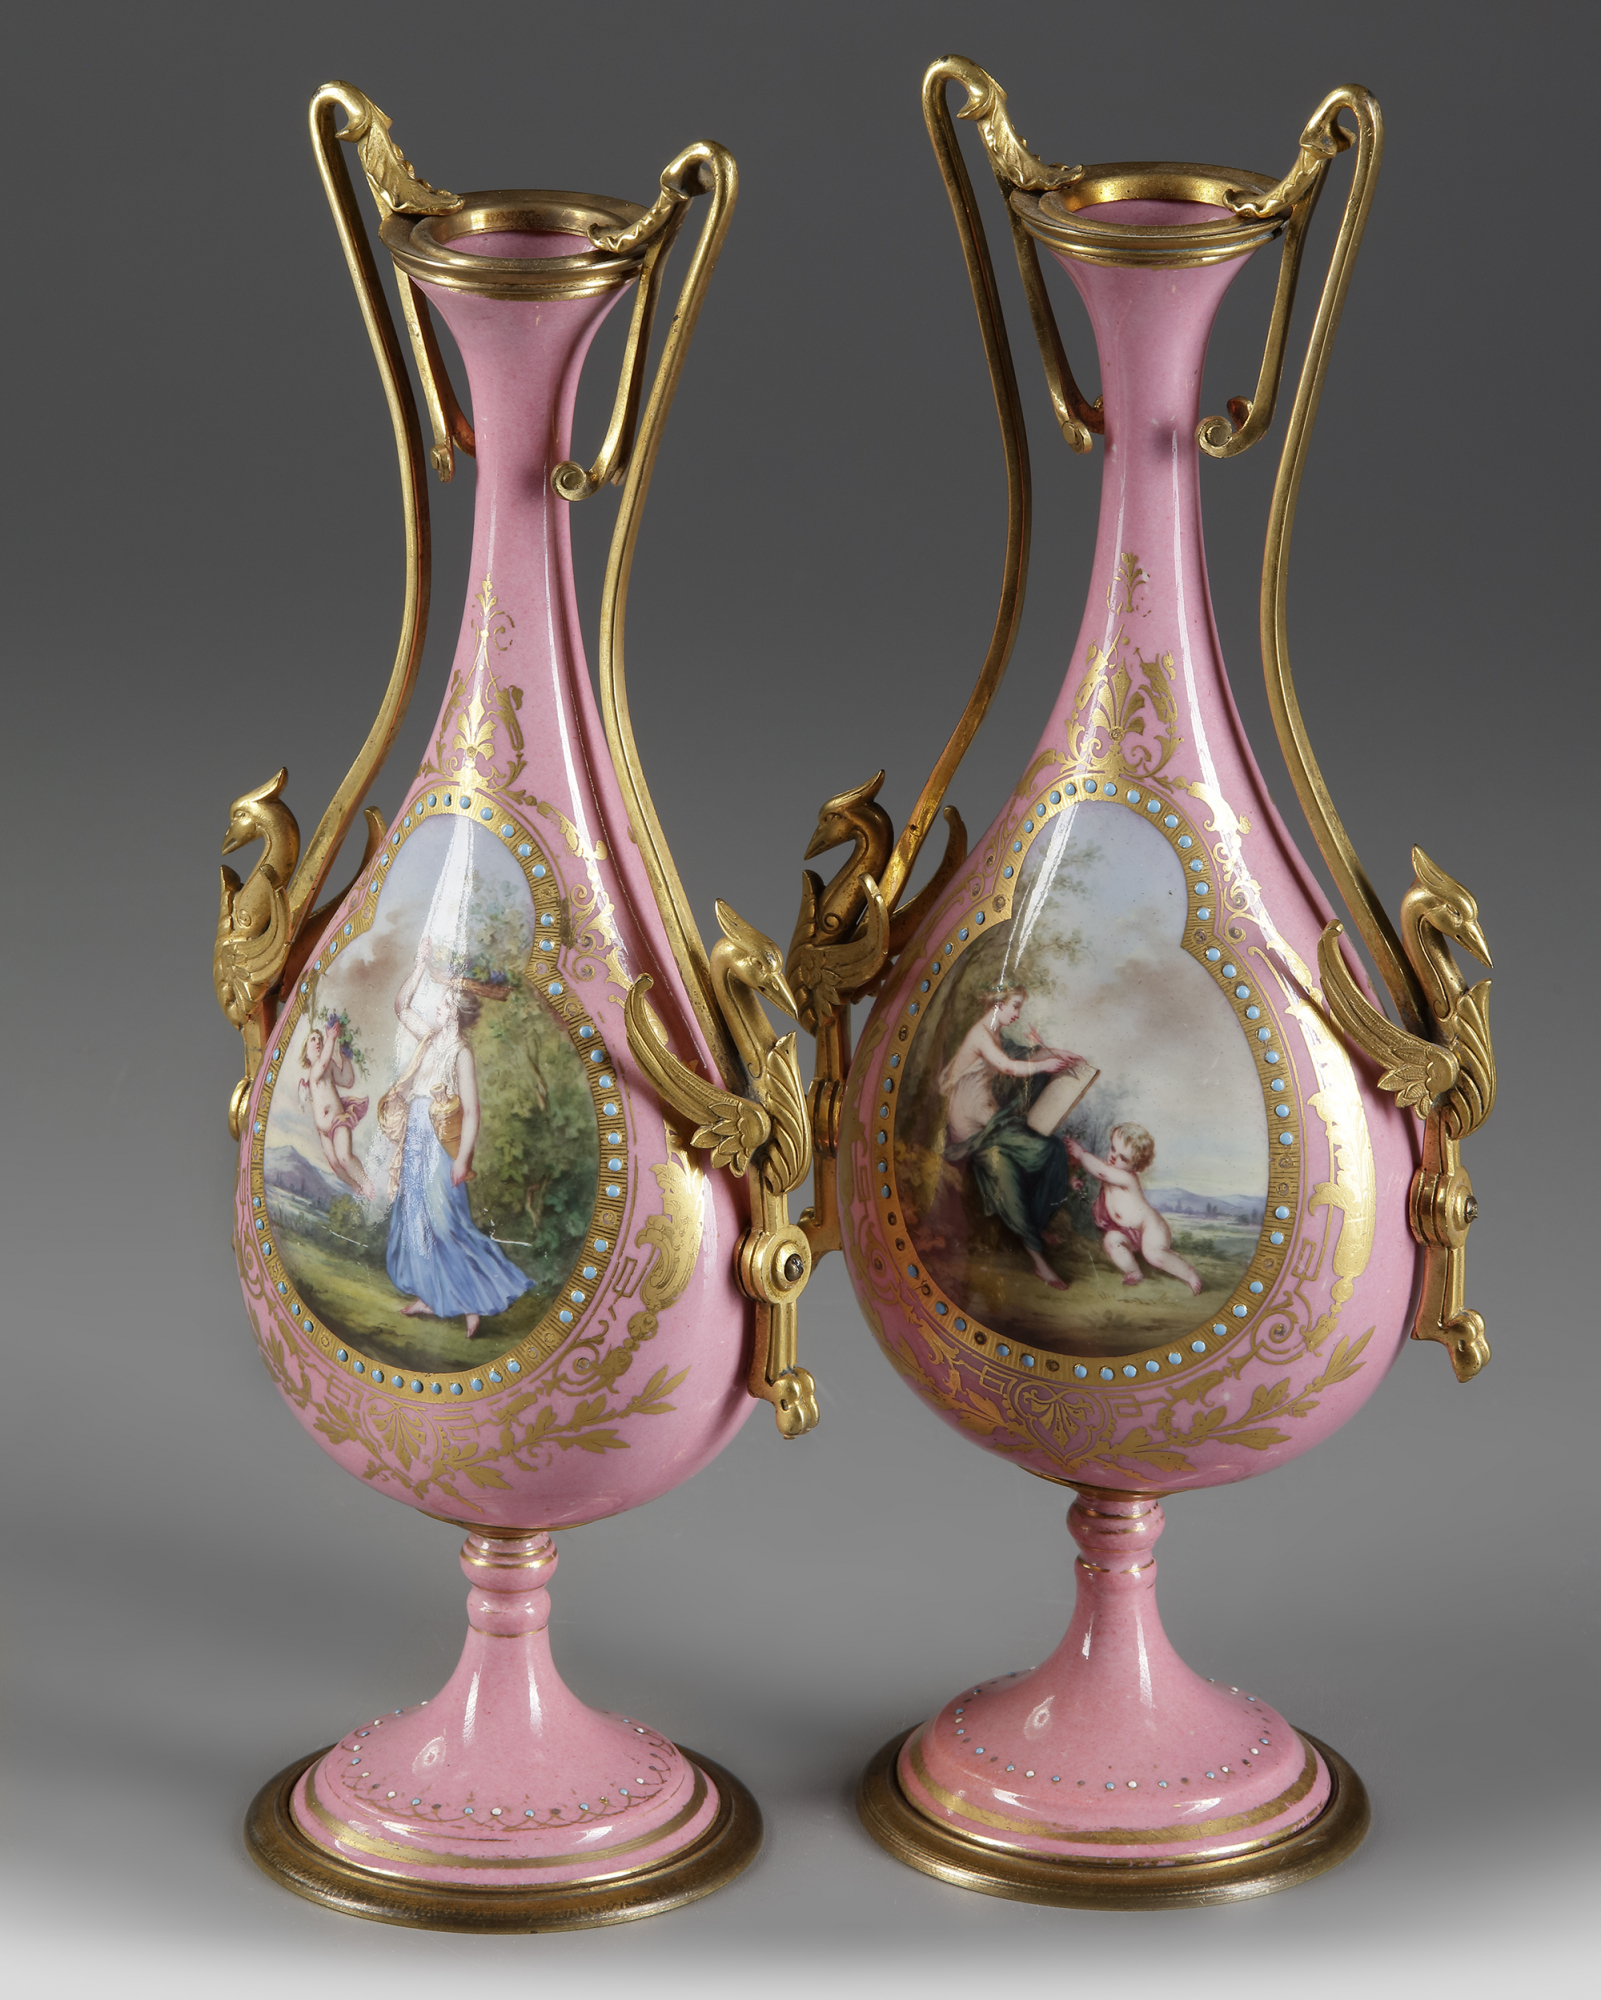 A PAIR OF FRENCH PINK SEVRES VASES, LATE 19TH CENTURY - Image 4 of 4